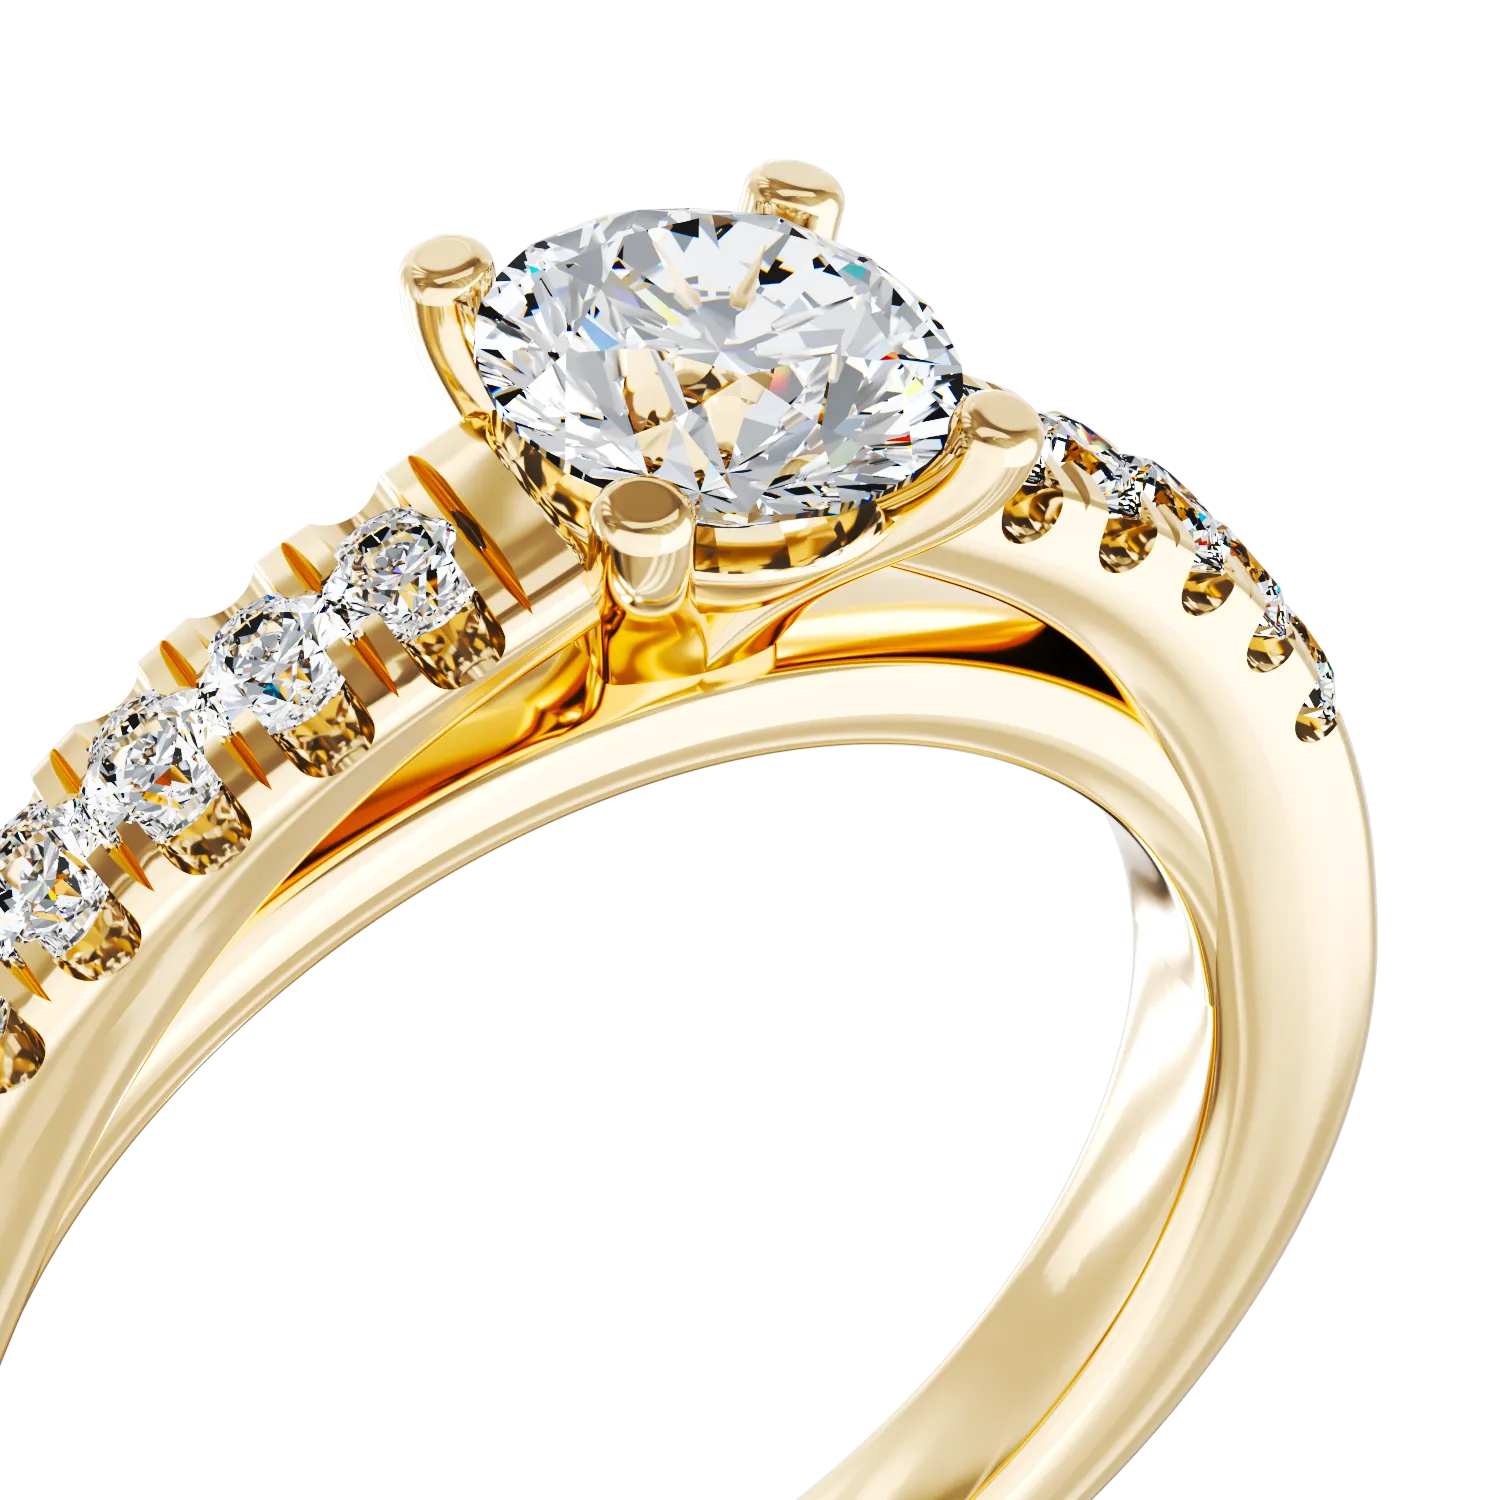 18K yellow gold engagement ring with 0.5ct diamond and 0.15ct diamonds